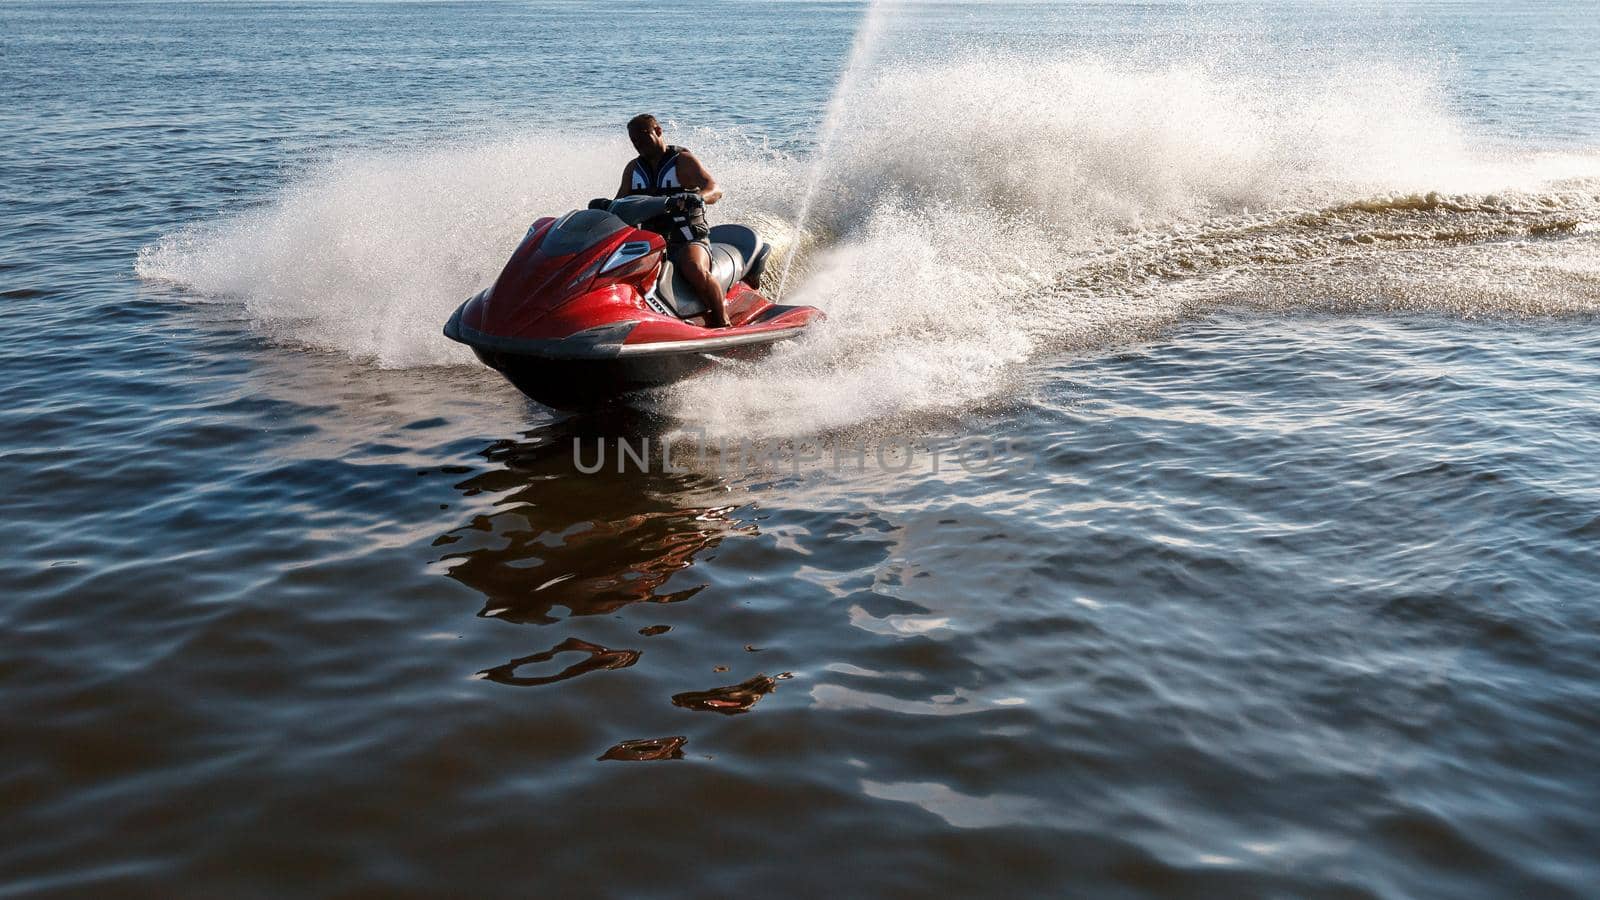 Man drives red jet ski on turquoise sea on a blue day. by Lincikas